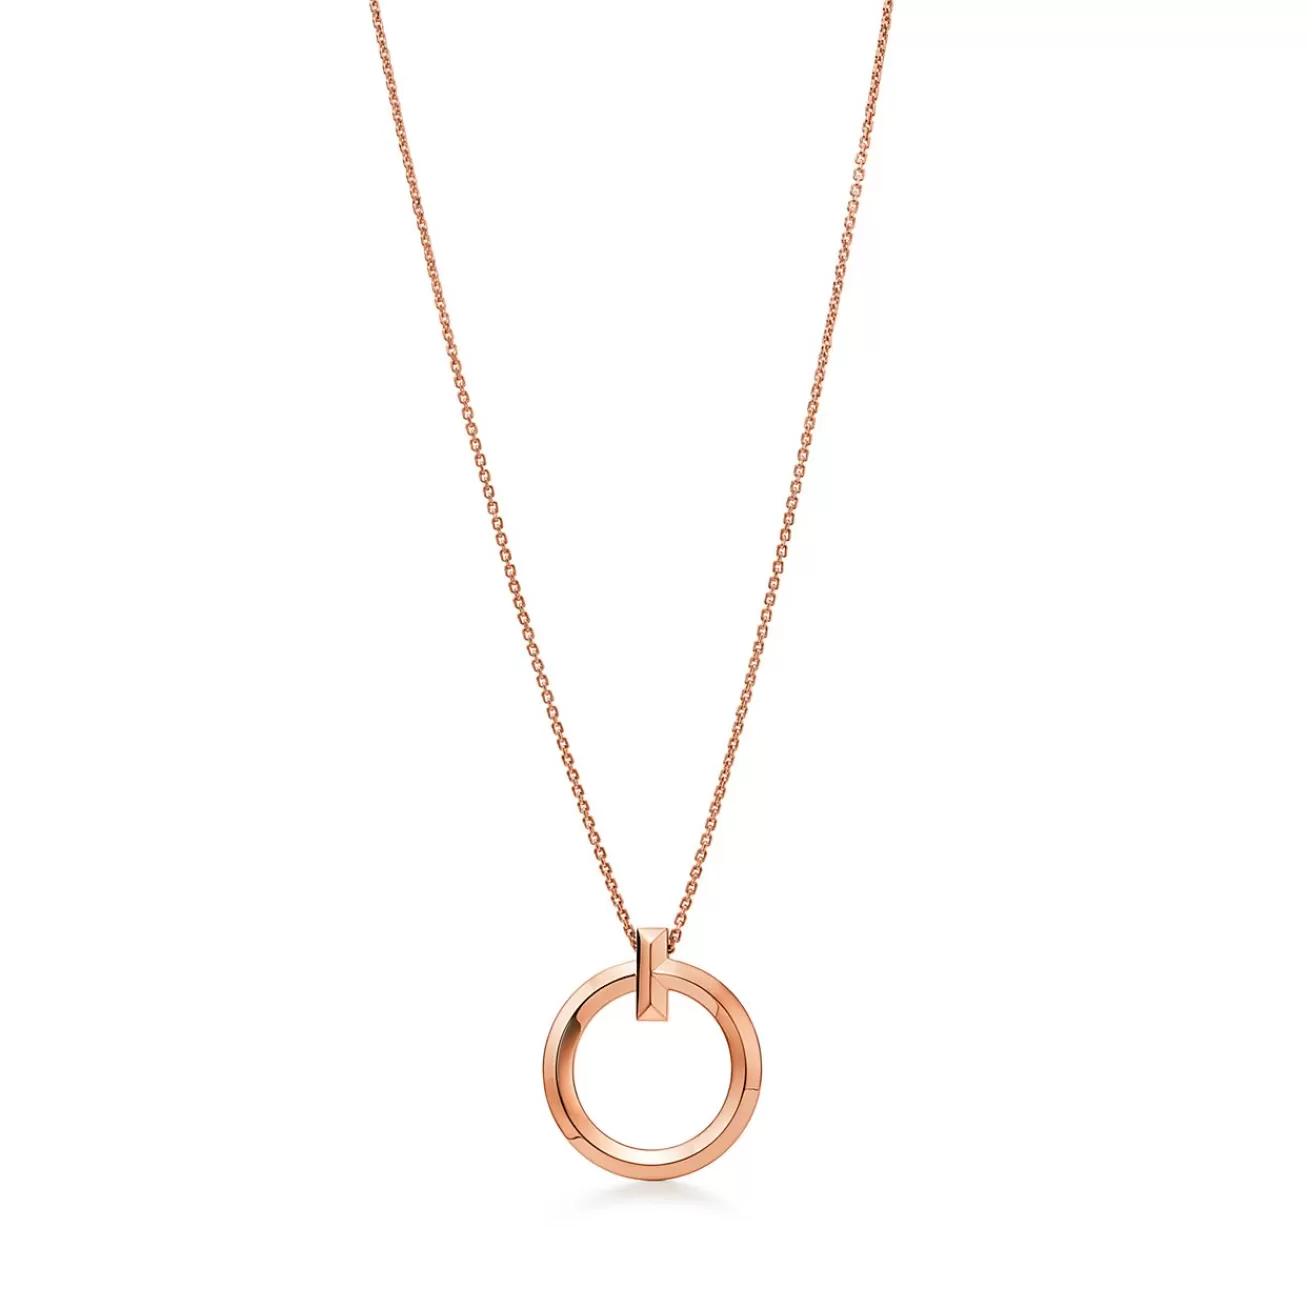 Tiffany & Co. Tiffany T T1 Circle Pendant in Rose Gold, Large | ^ Necklaces & Pendants | Men's Jewelry